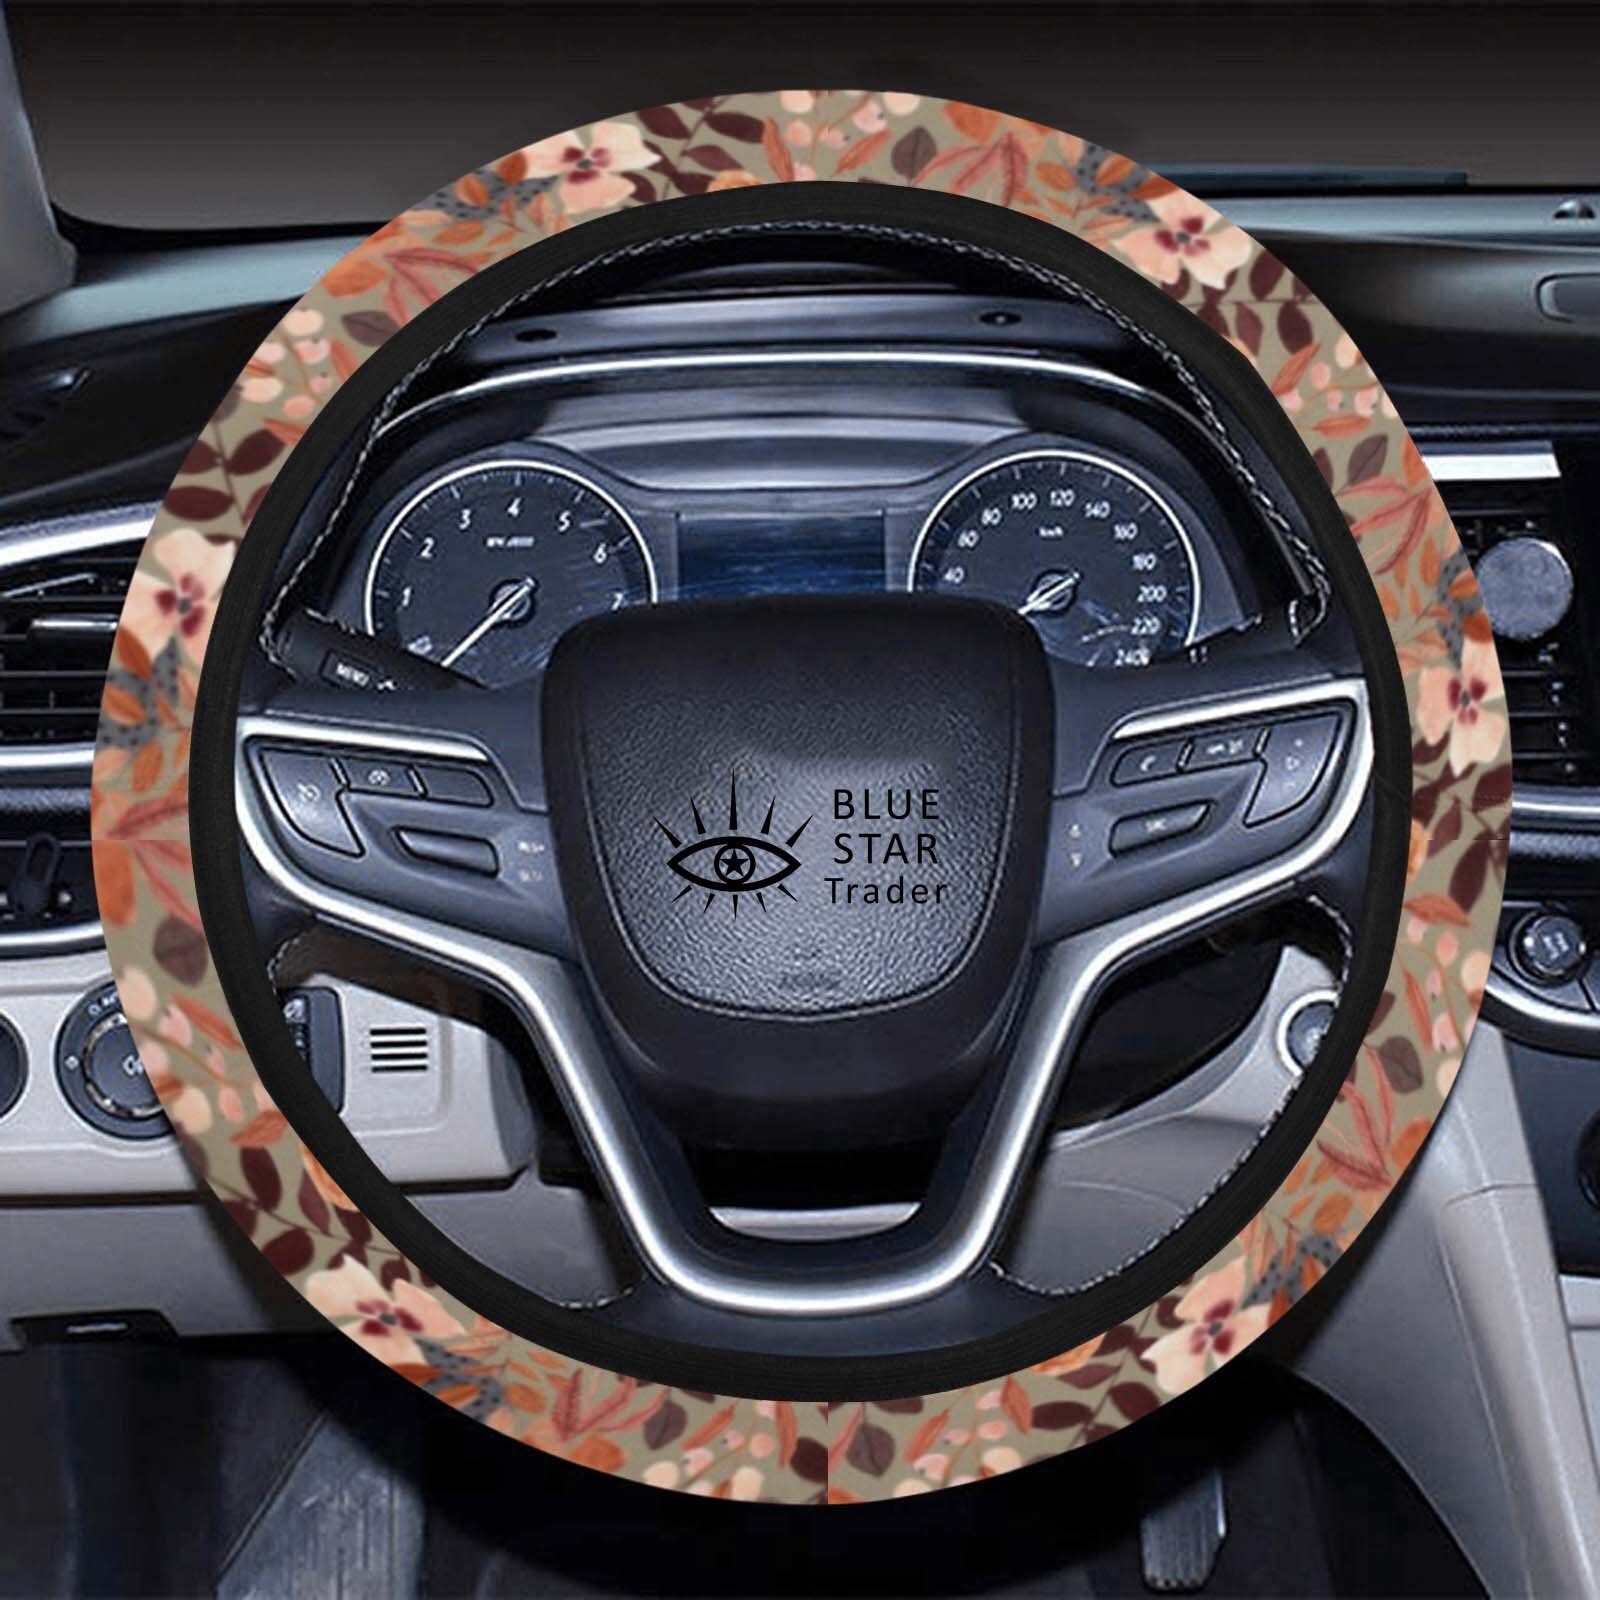 Rust Boho Floral Steering Wheel Cover With Grip Fabric Lining 